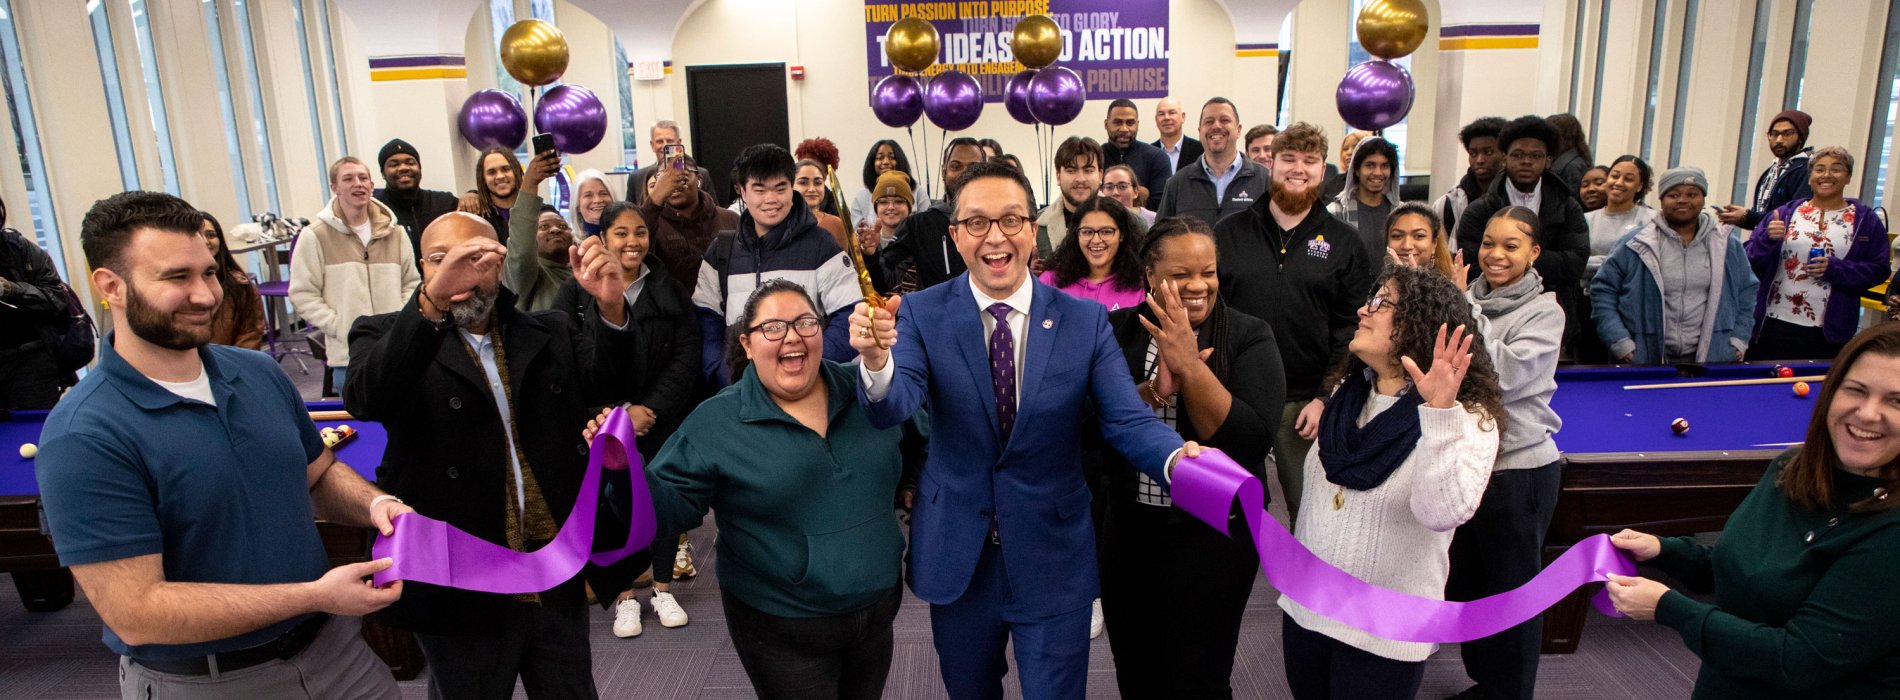 Student Affairs leadership cheers and smiles as they cut a purple ribbon inside UAlbany's new game room.